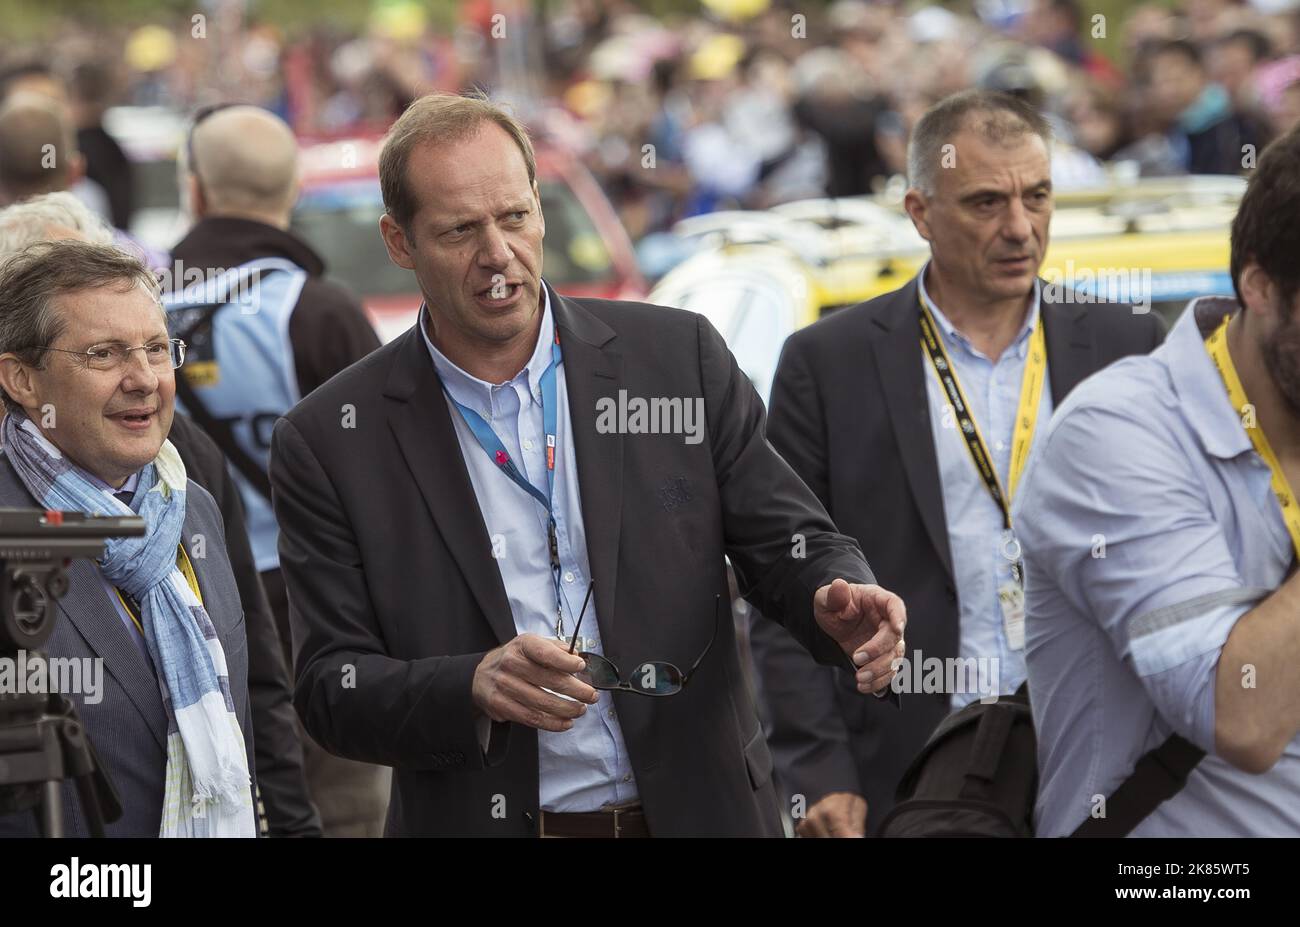 Course Director Christian Prudhomme at the start of the race. Stock Photo